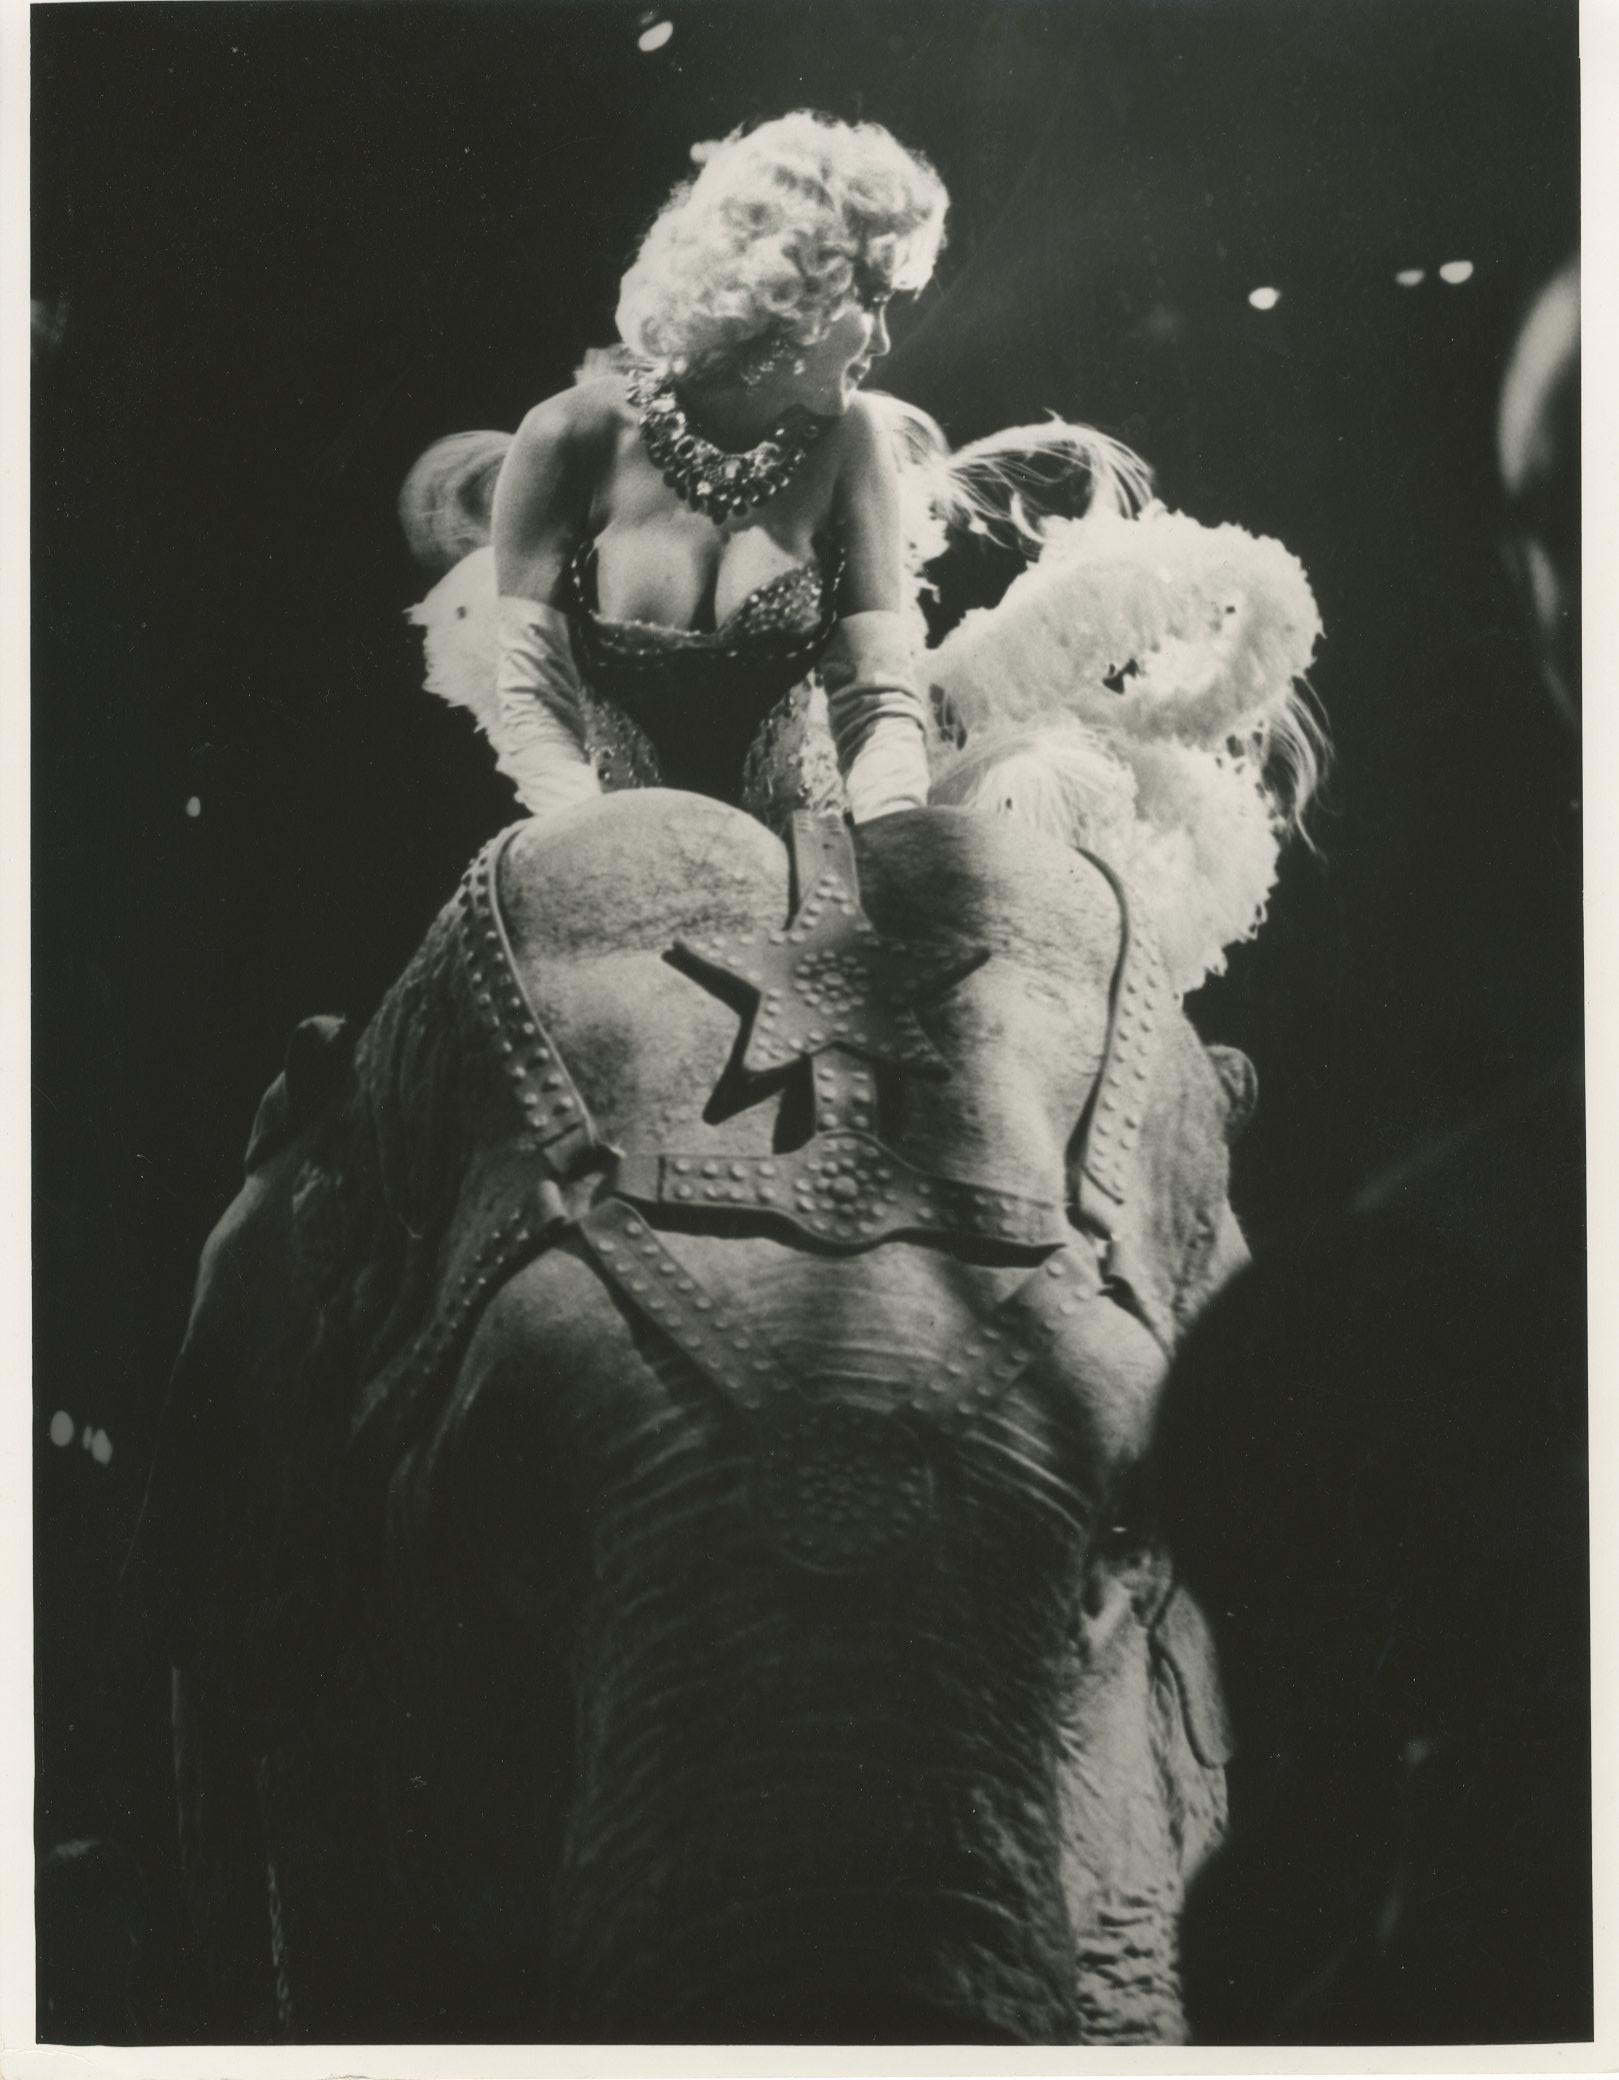 Weegee Black and White Photograph - Marilyn Monroe Riding the Elephant